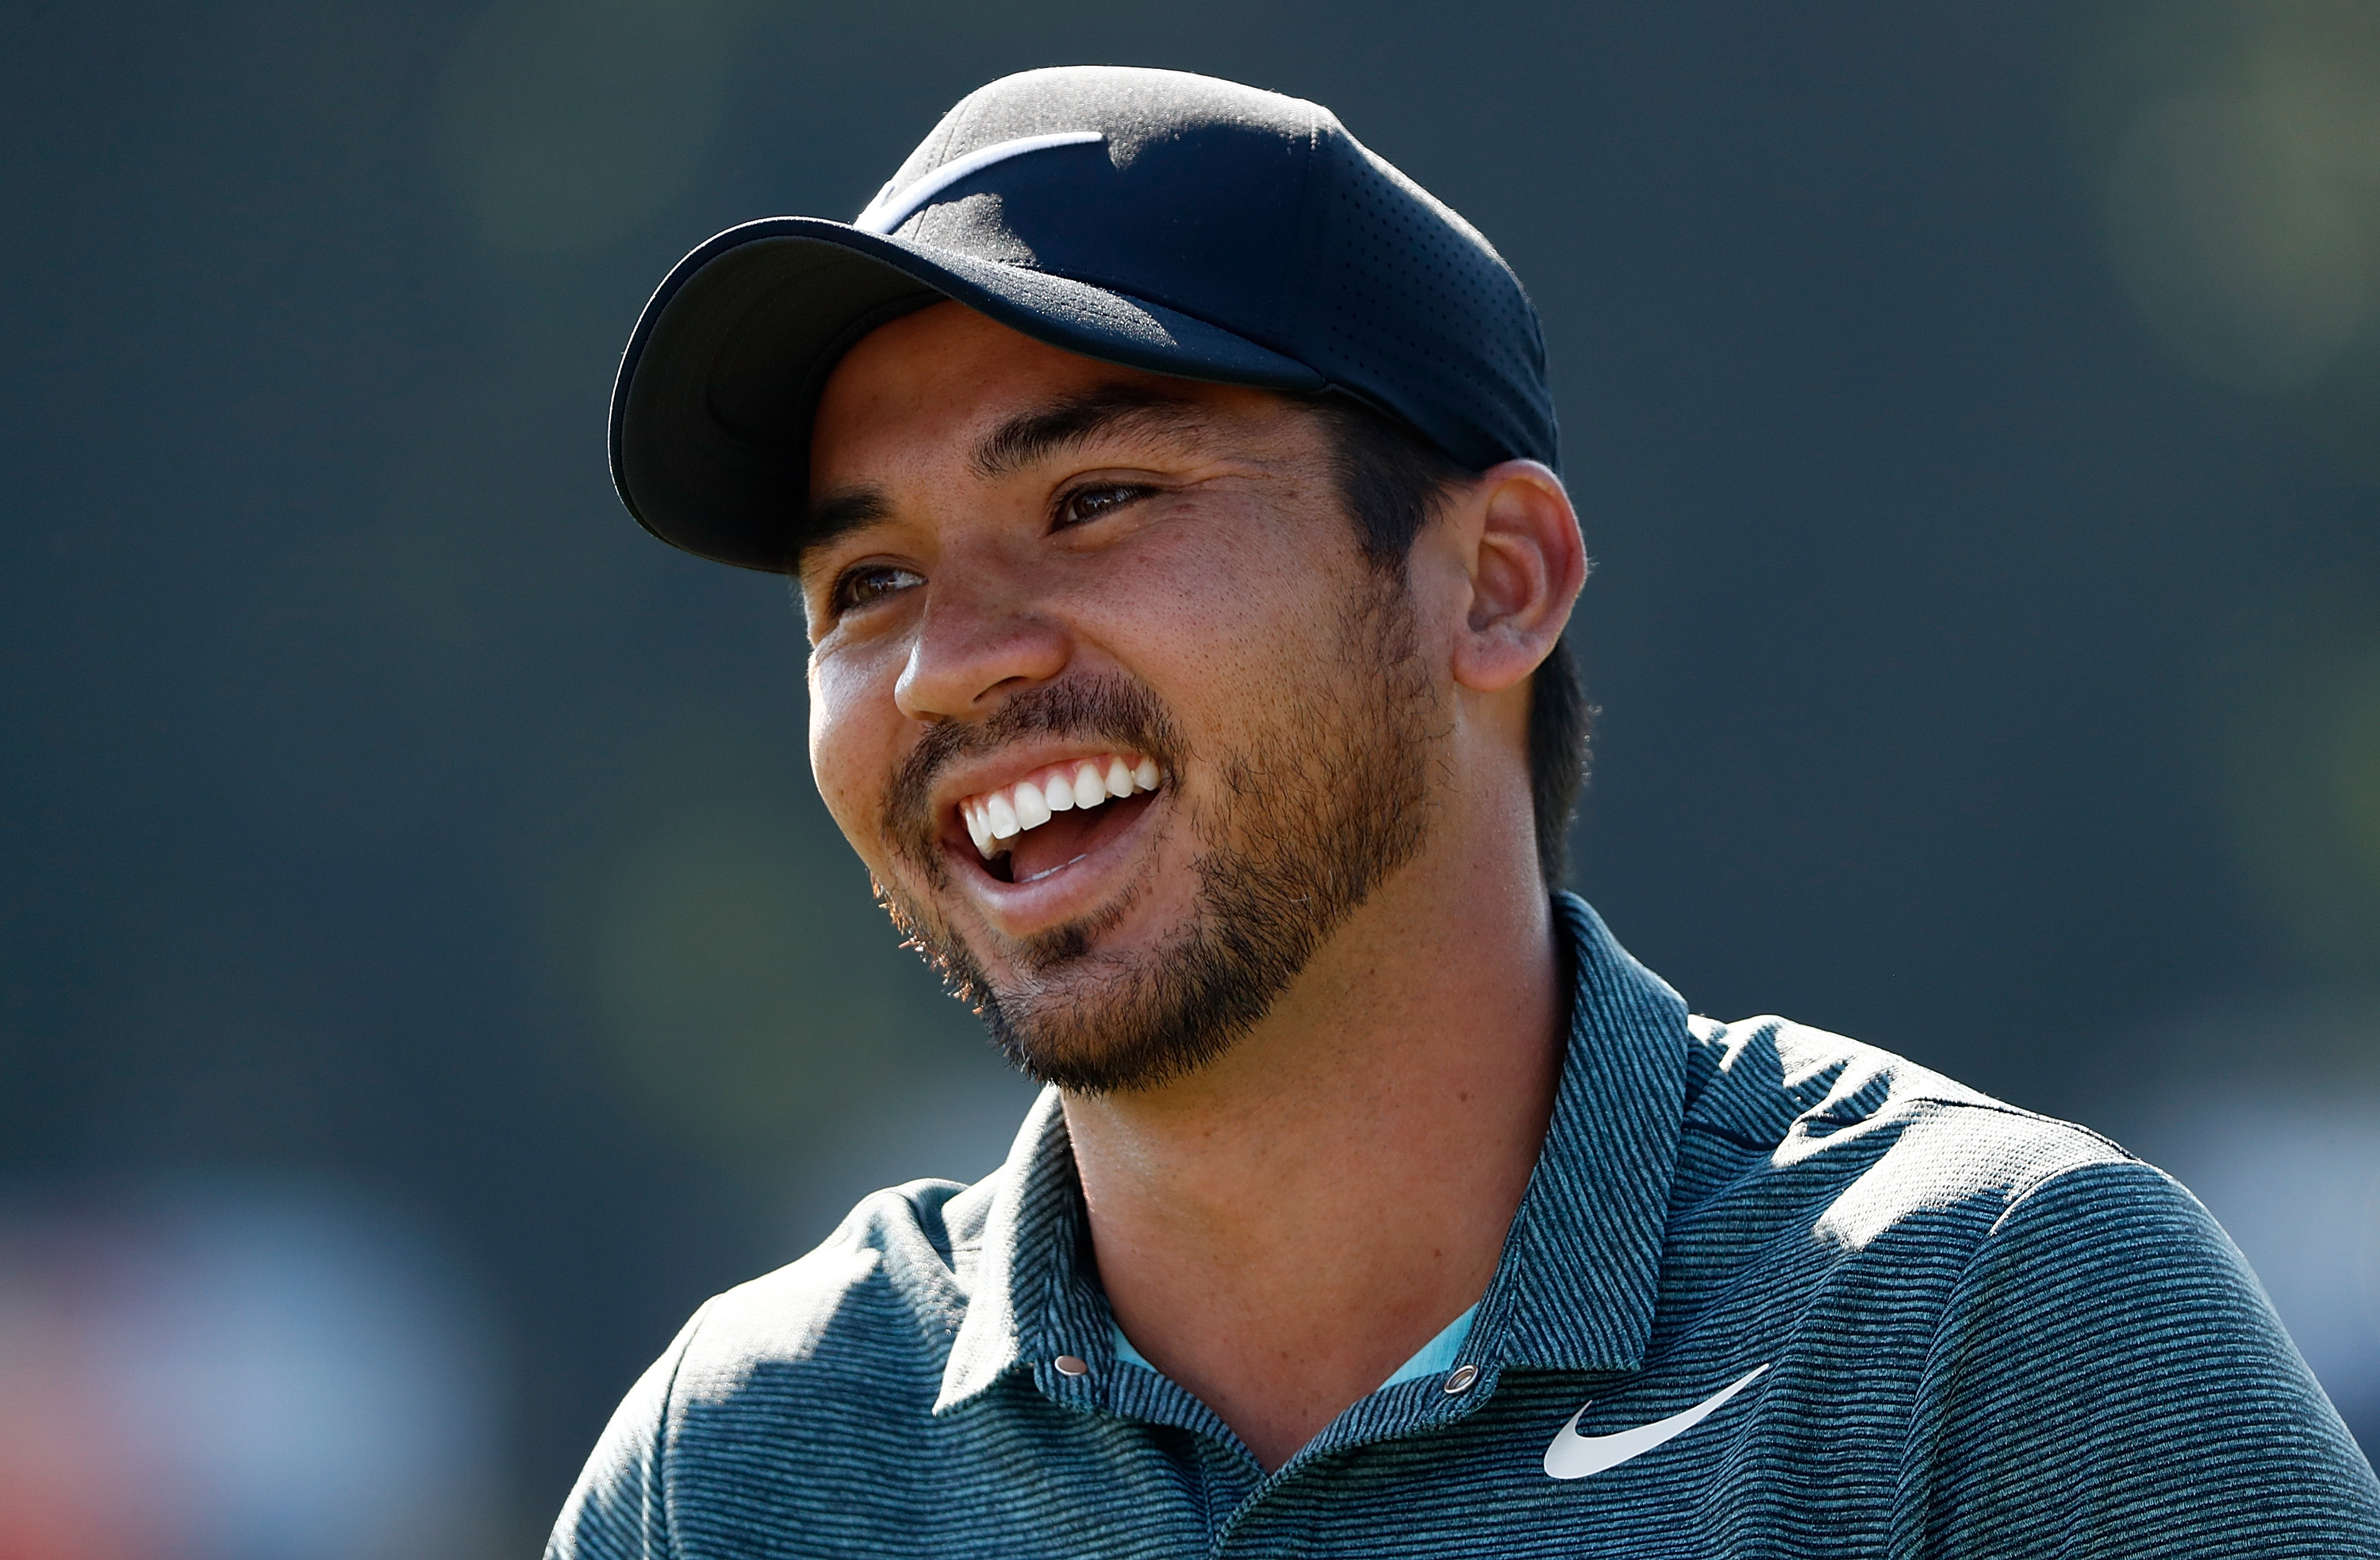 Jason Day changes caddie and irons ahead of The Masters